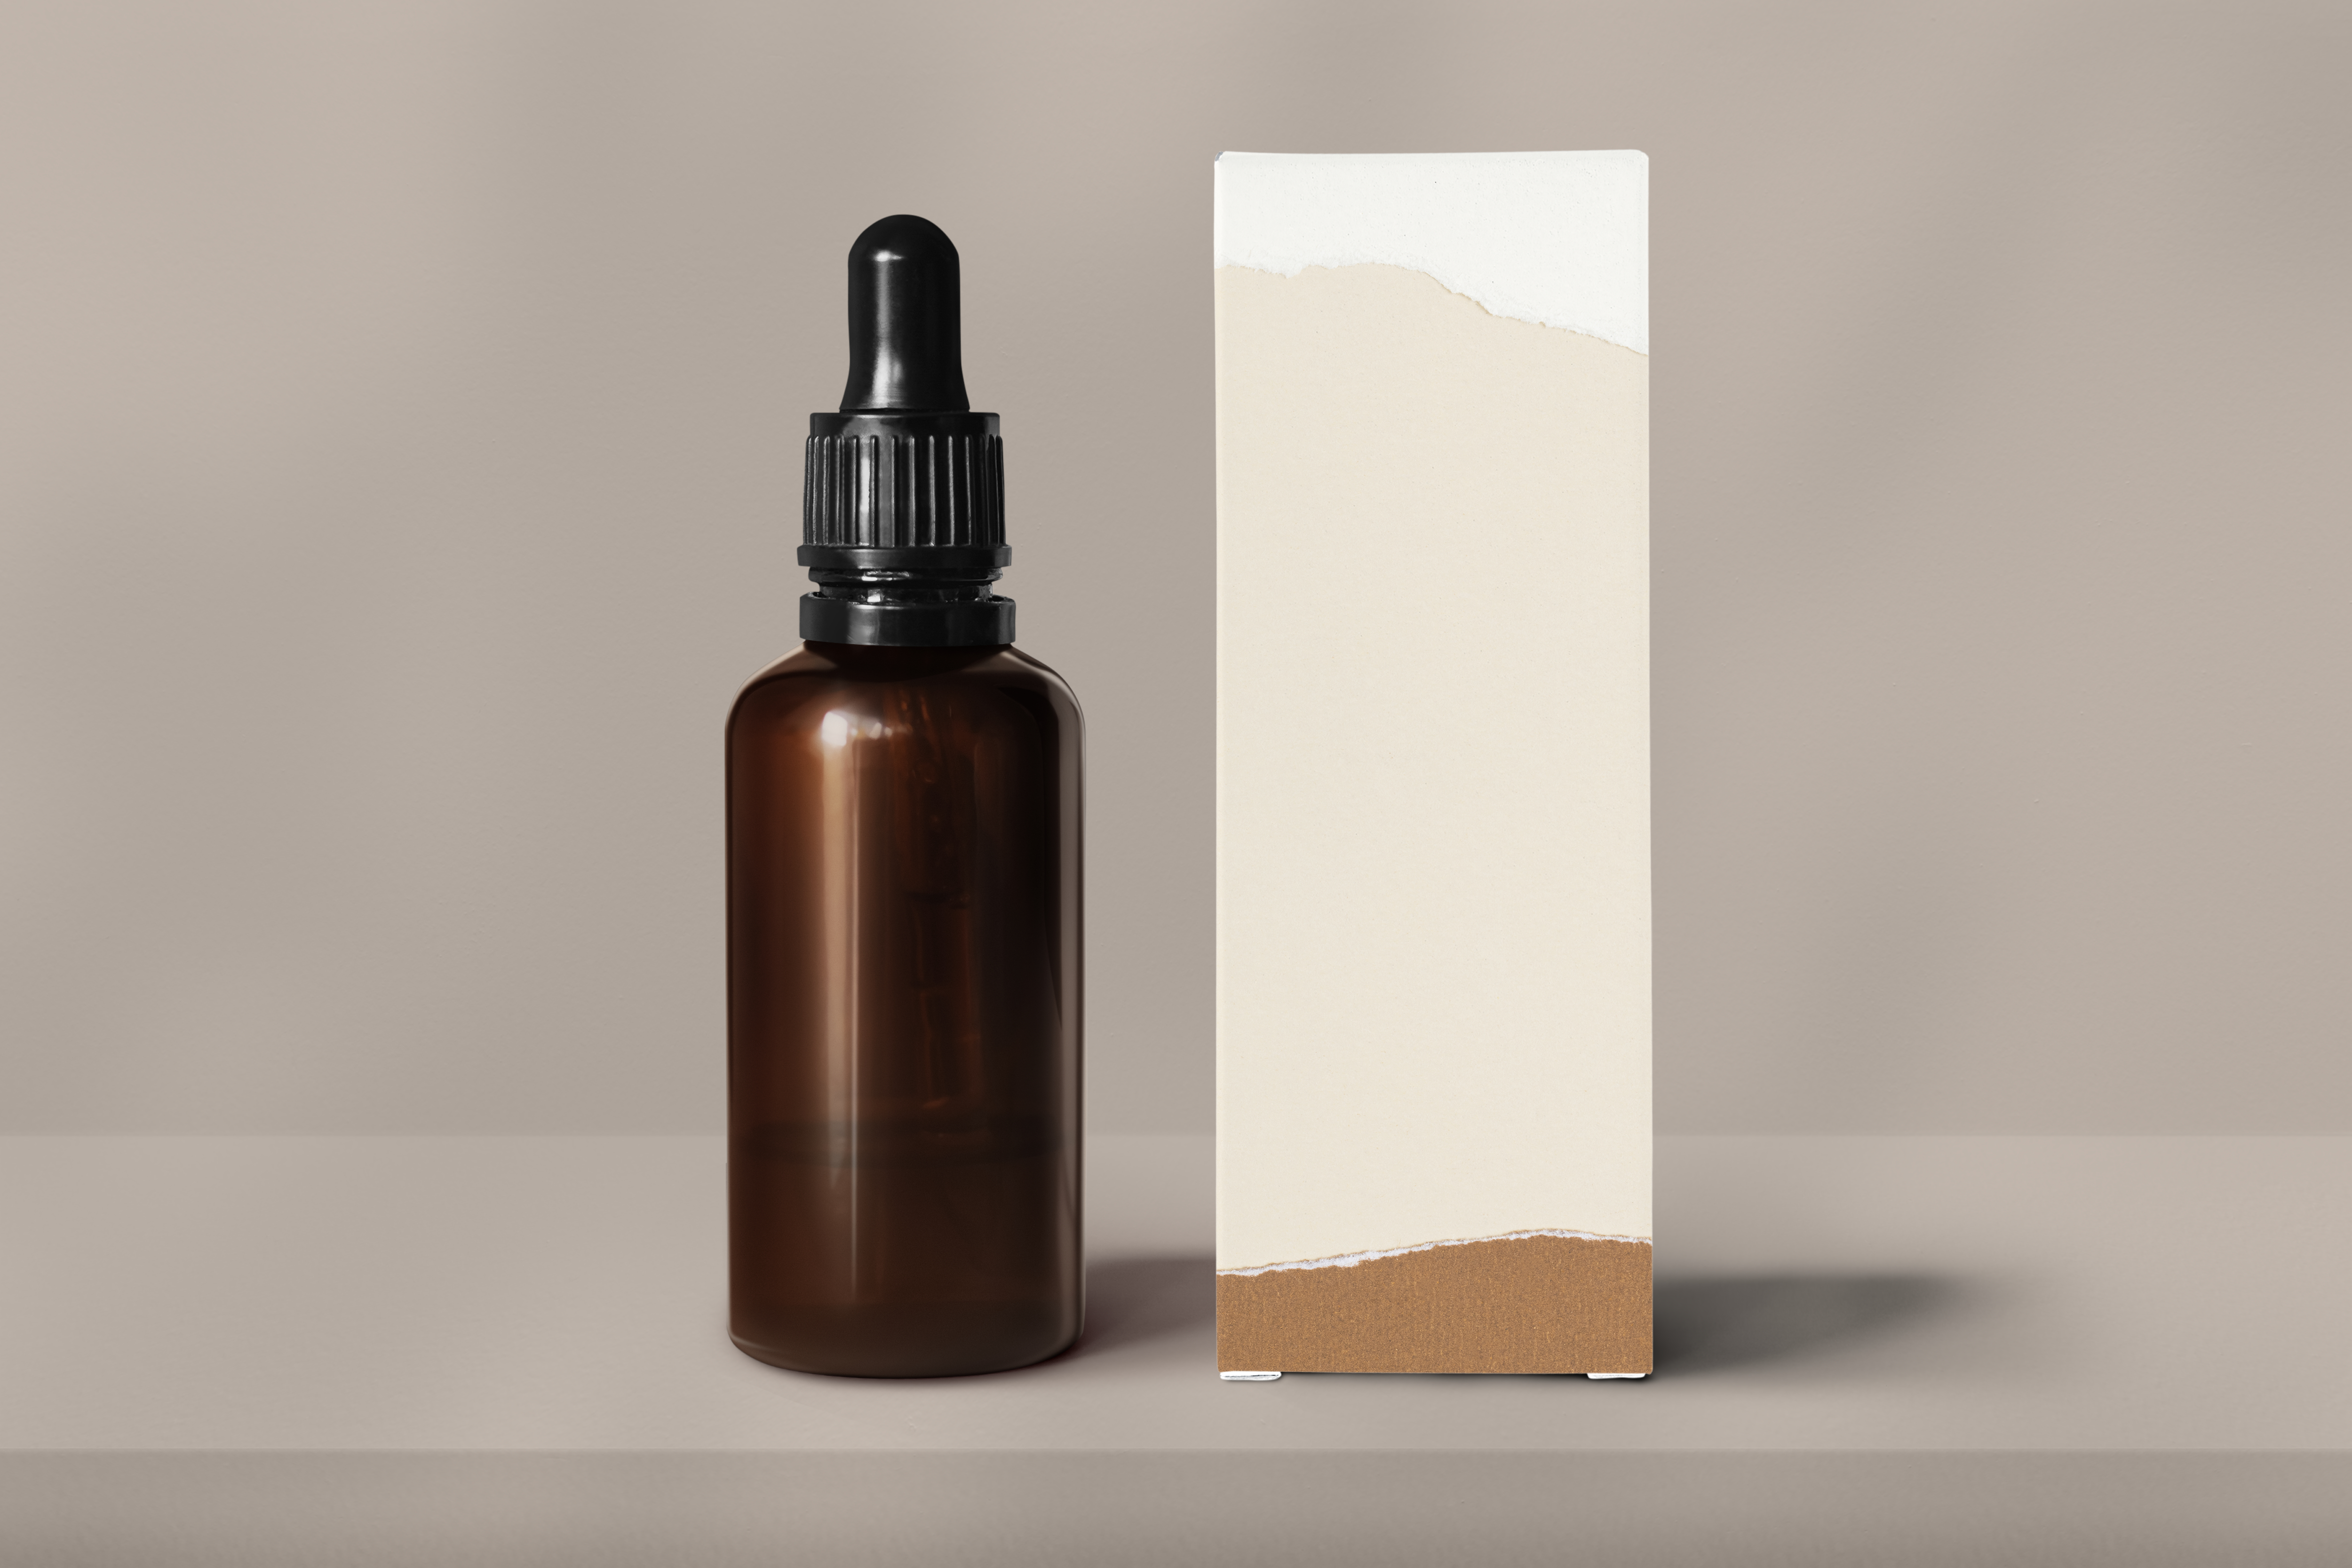 glass bottle and paperboard box packaging options